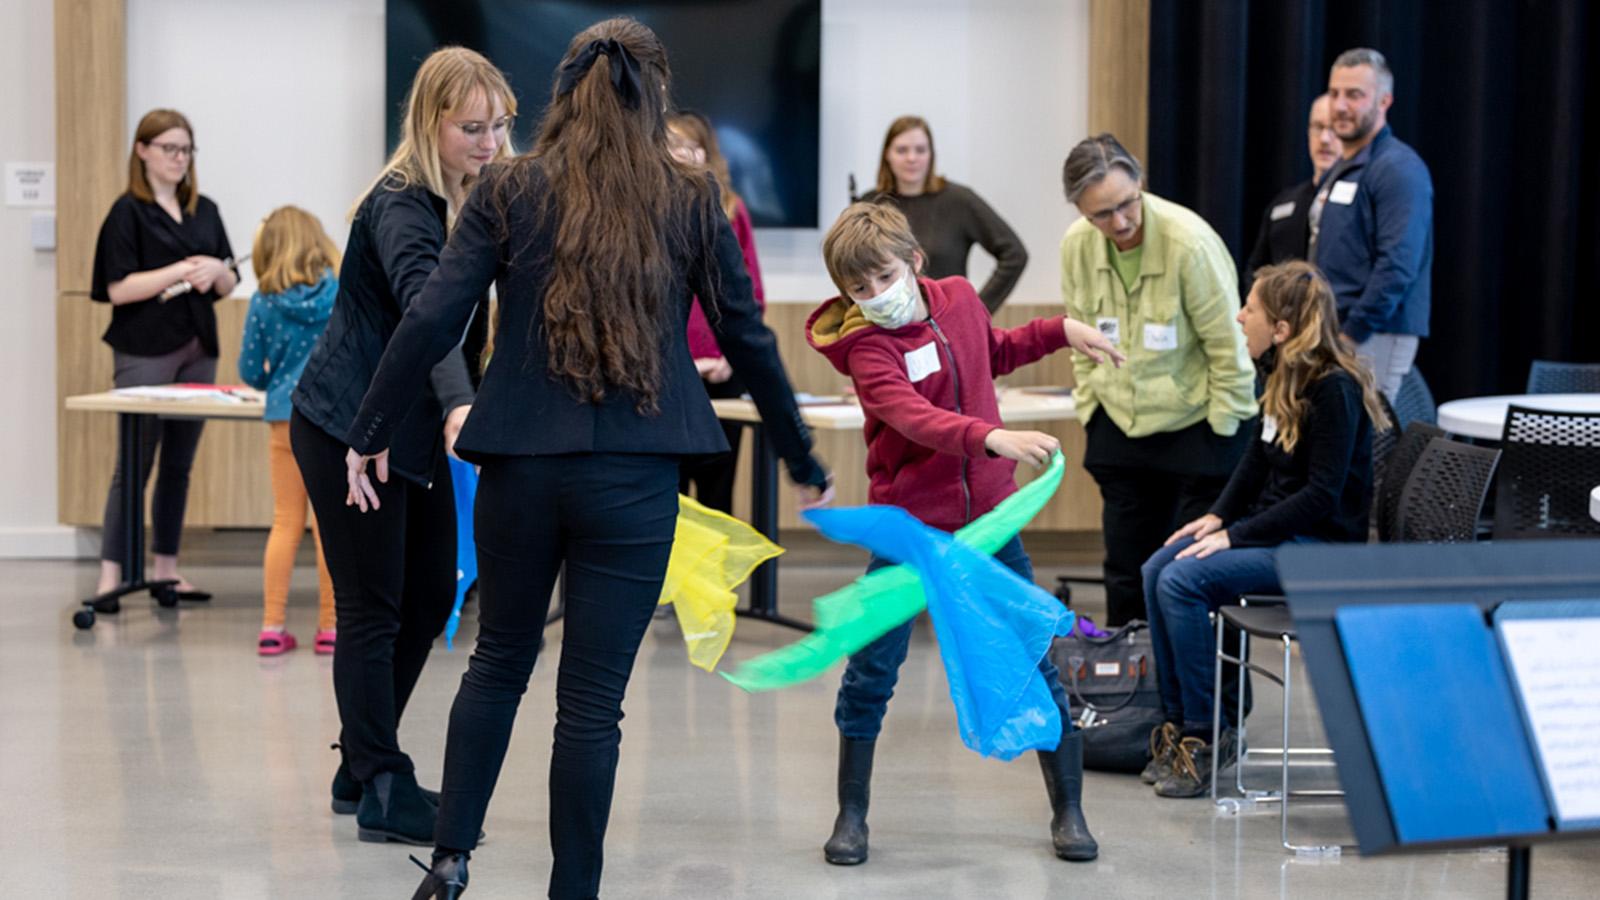 Movement activity with colorful scarves